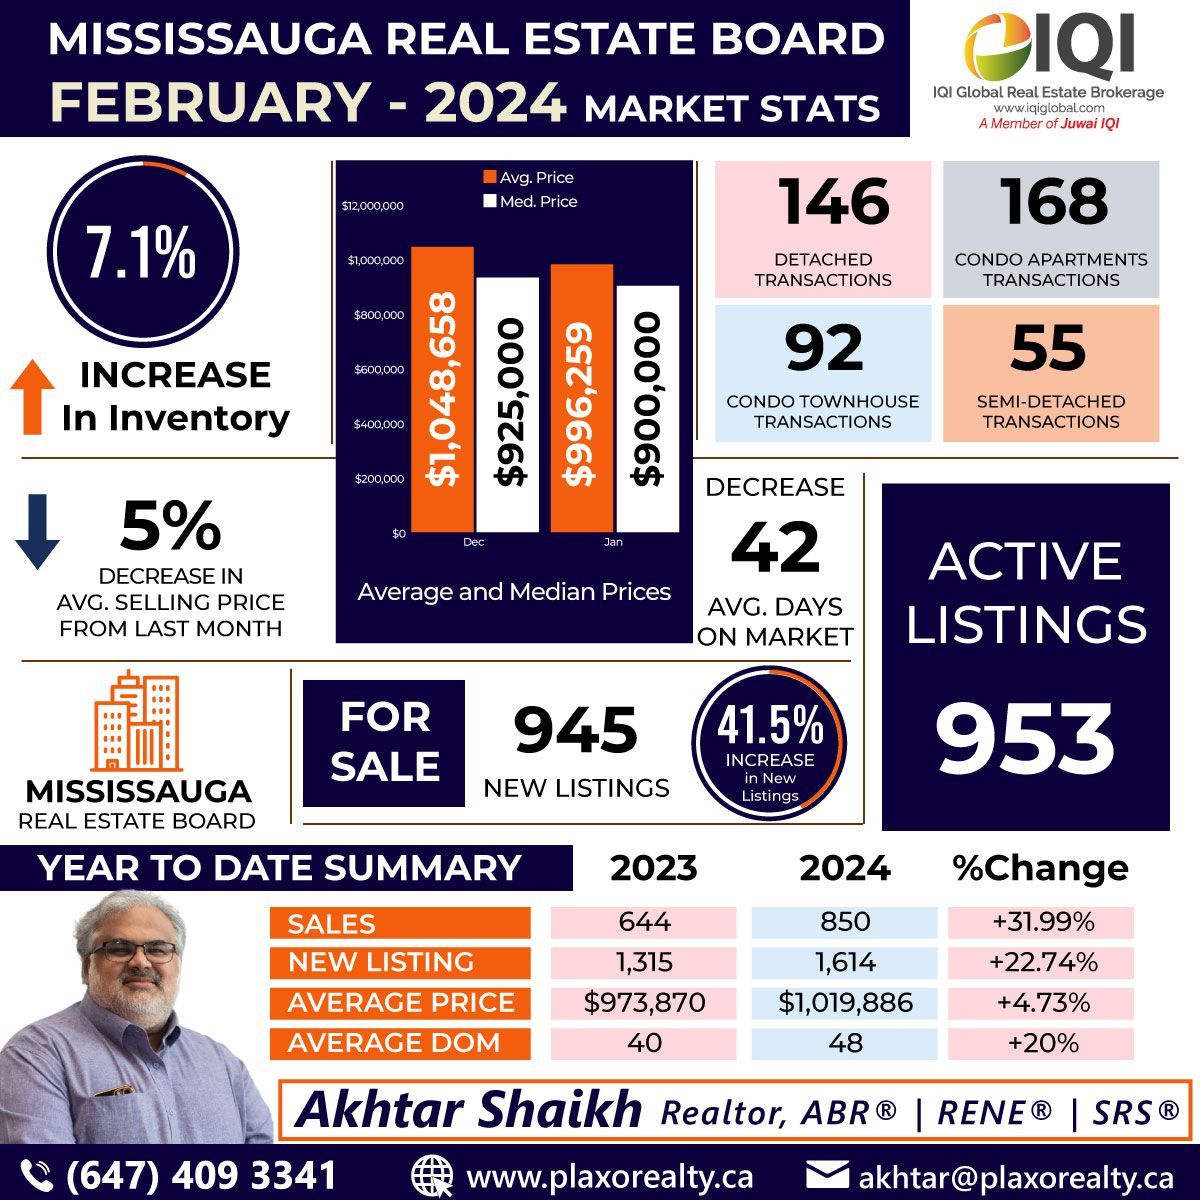 📈 Check out the Real Estate Market Snapshot!
..
⭐⭐⭐⭐⭐ 𝗔𝗞𝗛𝗧𝗔𝗥 𝗦𝗛𝗔𝗜𝗞𝗛
Realtor, ABR® | RENE® | SRS®
📞 +1 647-409-3341 | Akhtar@PlaxoRealty.ca
.
#akhtariqi #akhtarshaikh #mississaugarealty #mississaugamarket #mississaugarealestate